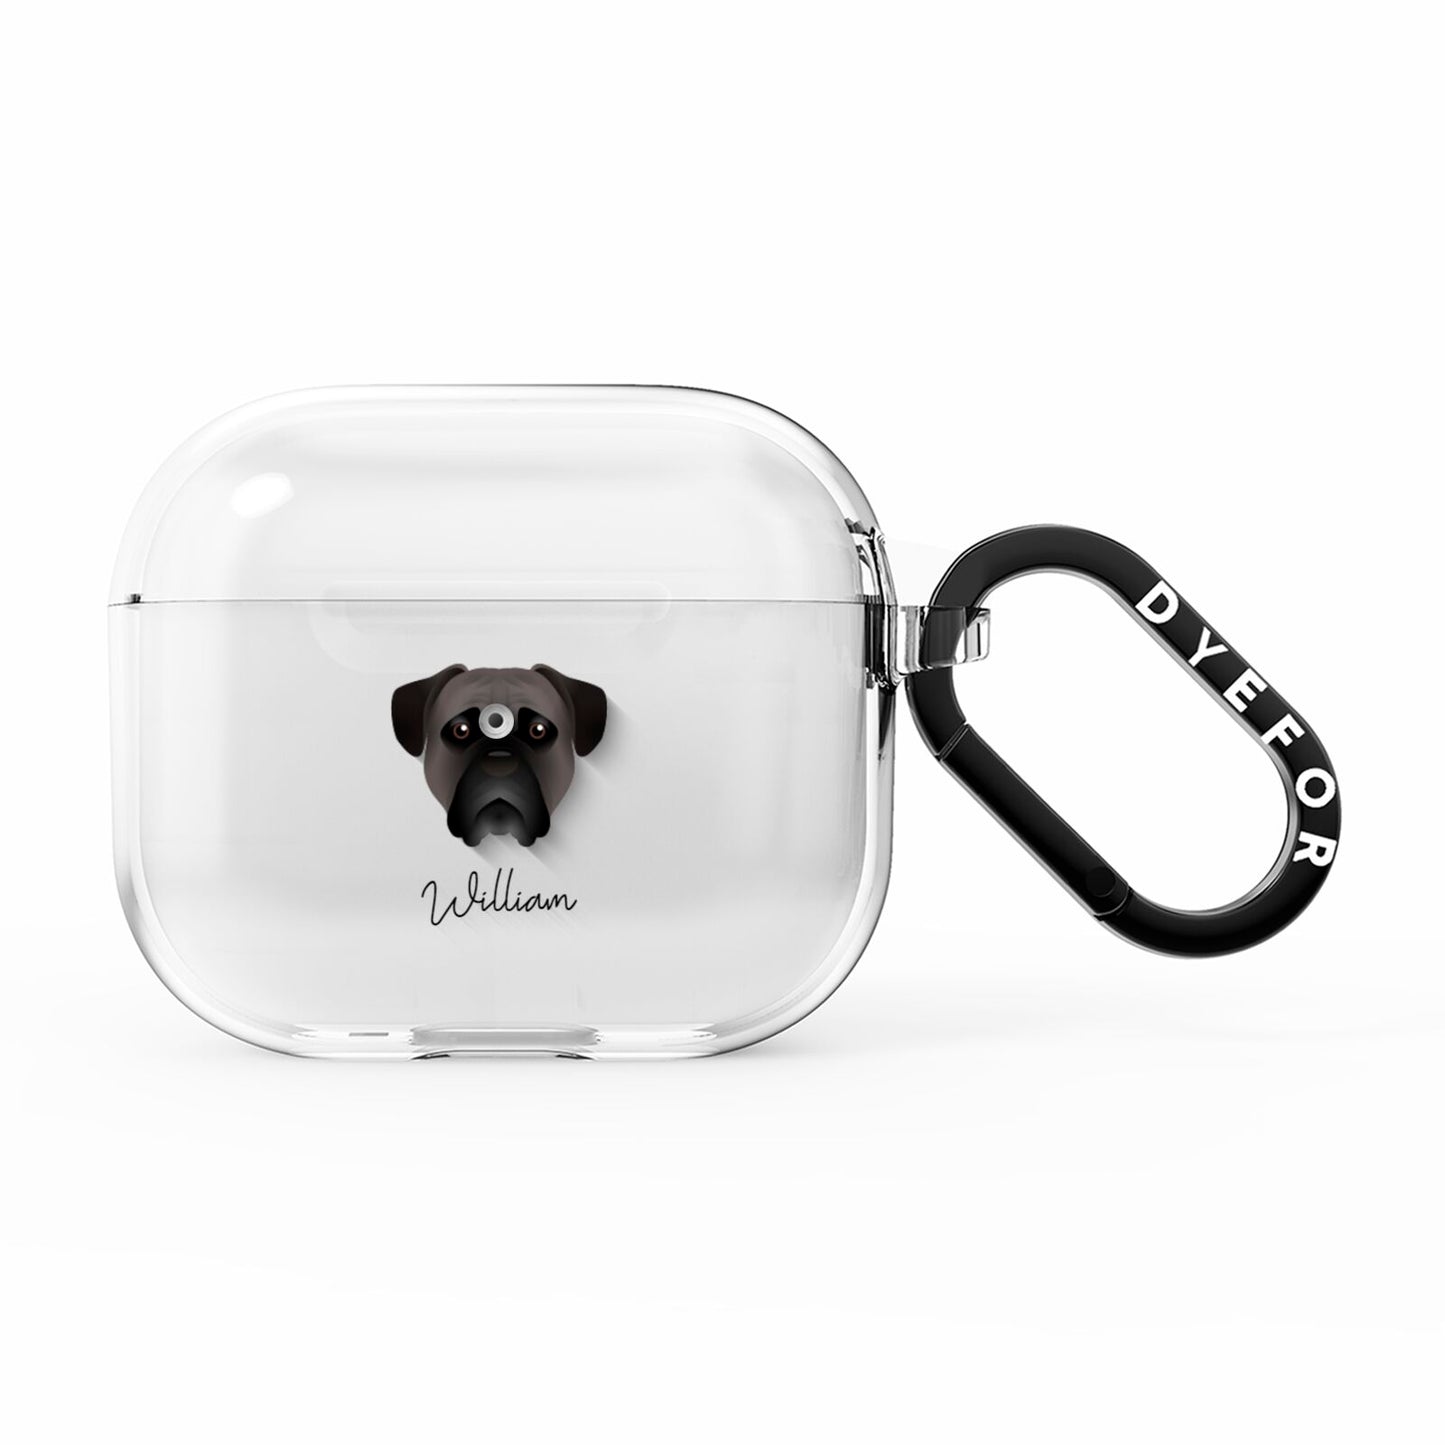 Bullmastiff Personalised AirPods Clear Case 3rd Gen